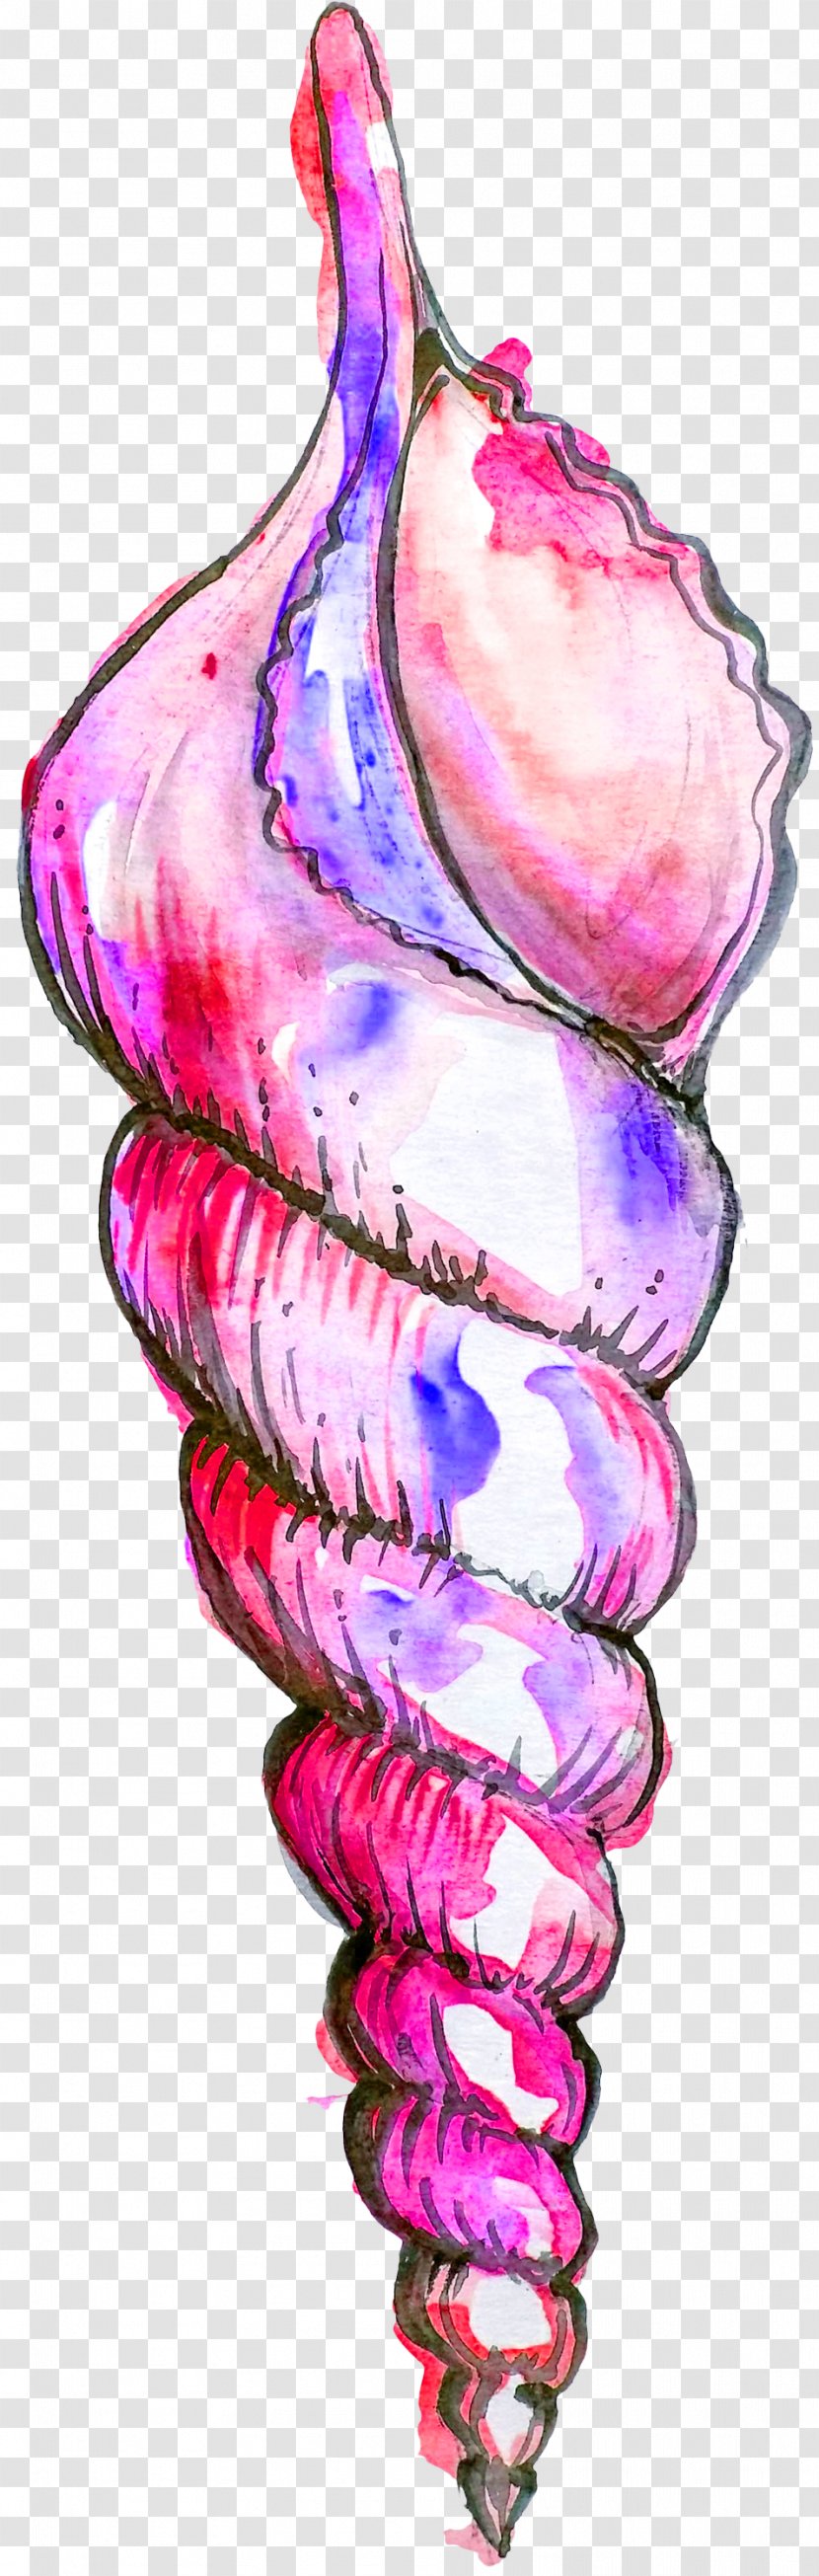 Drawing Watercolor Painting Illustration - Heart - Ocean Beauty Fish Tail Transparent PNG